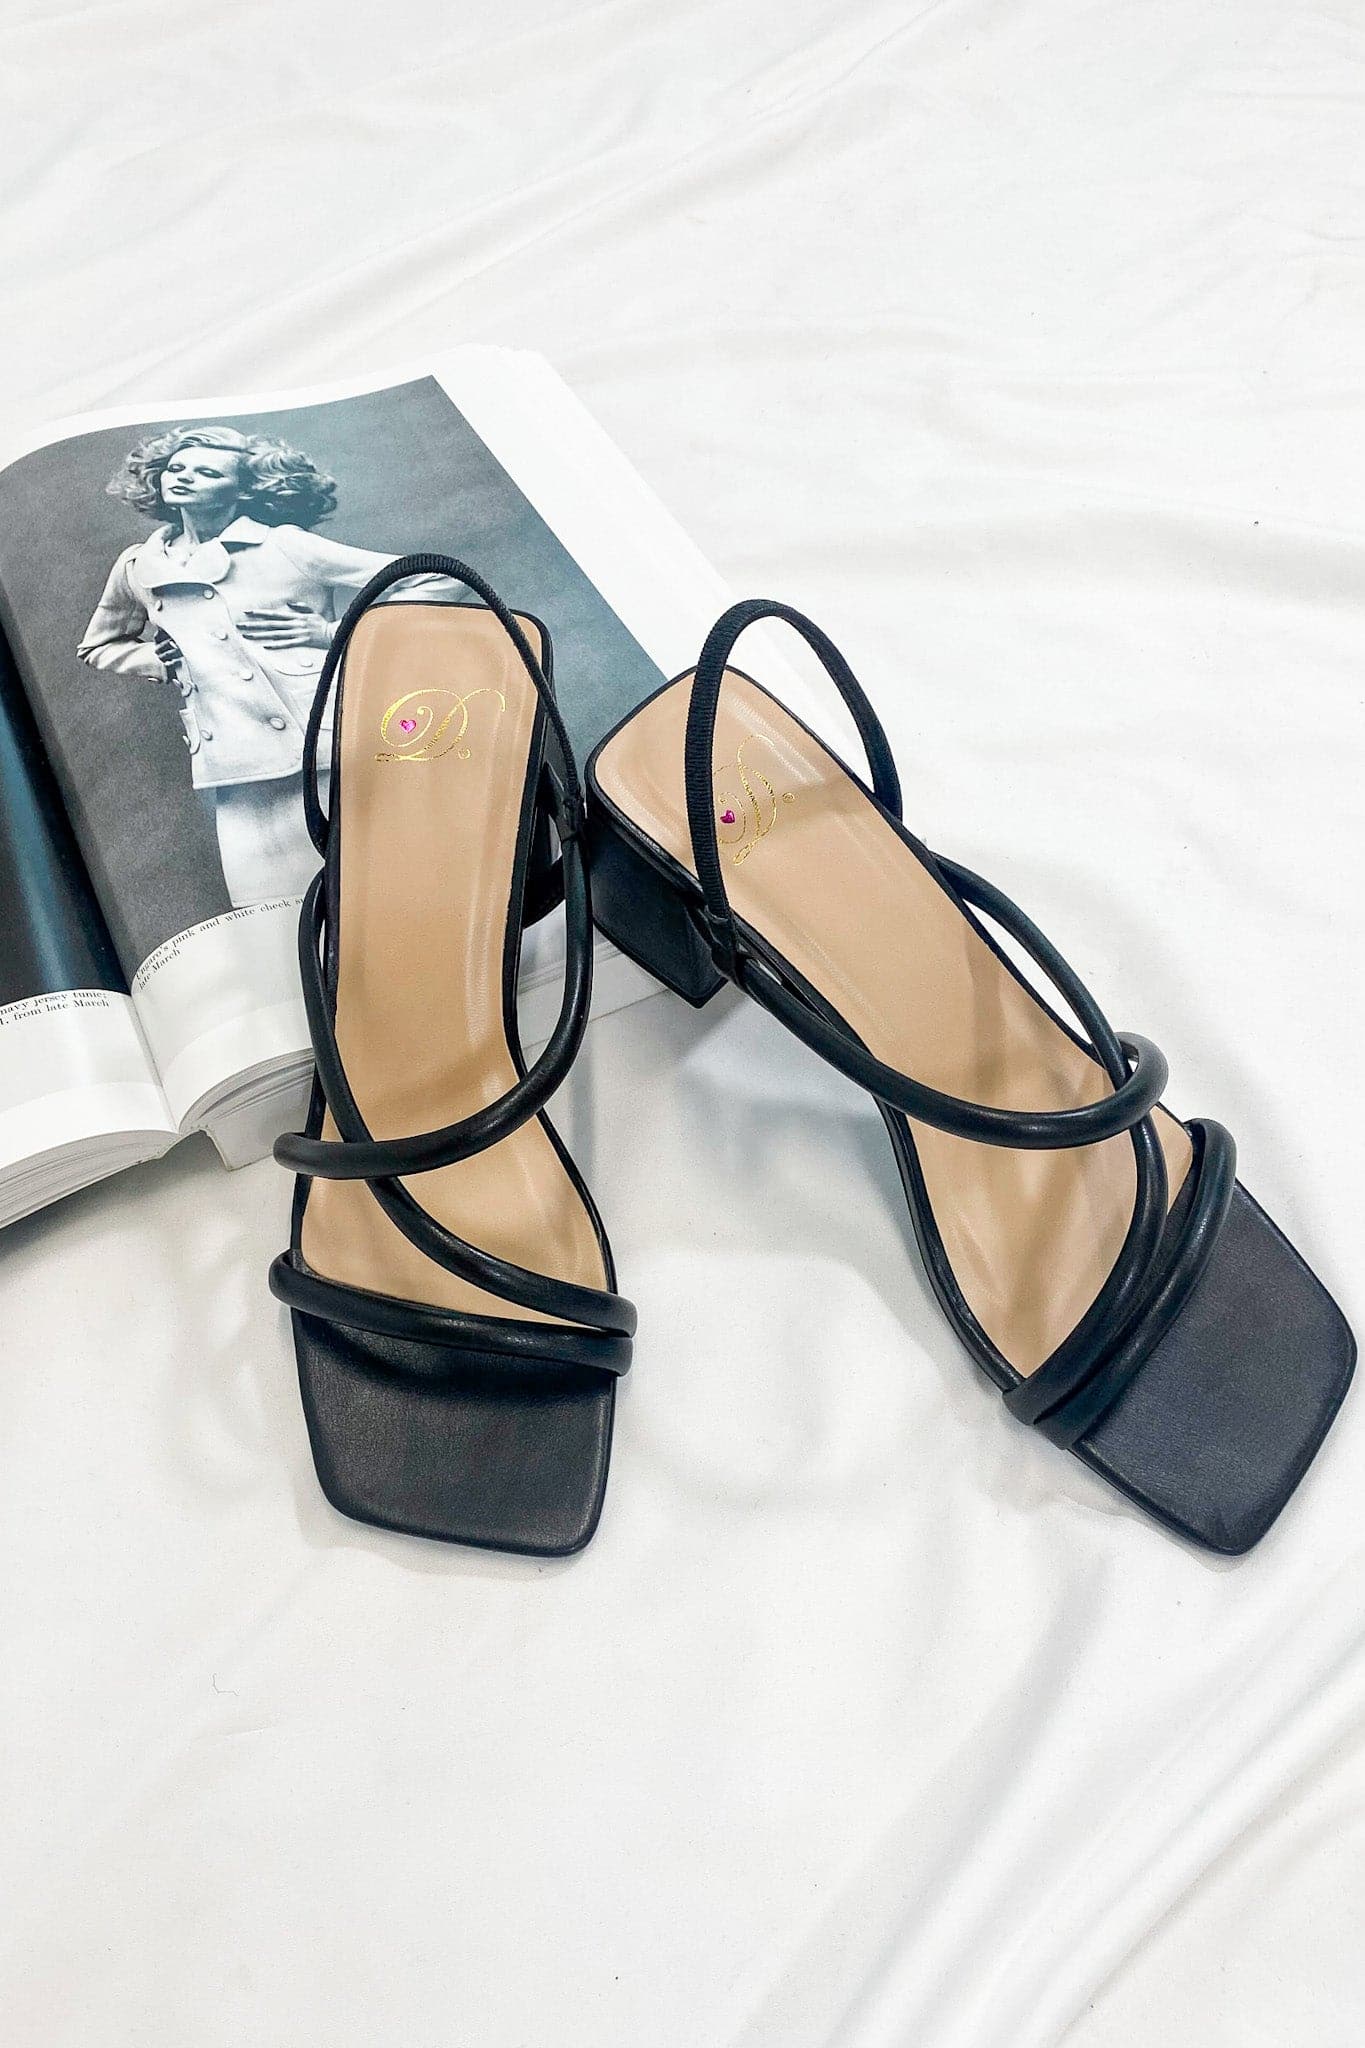 Black / 5.5 Chic Happens Strappy Heels - FINAL SALE - Madison and Mallory